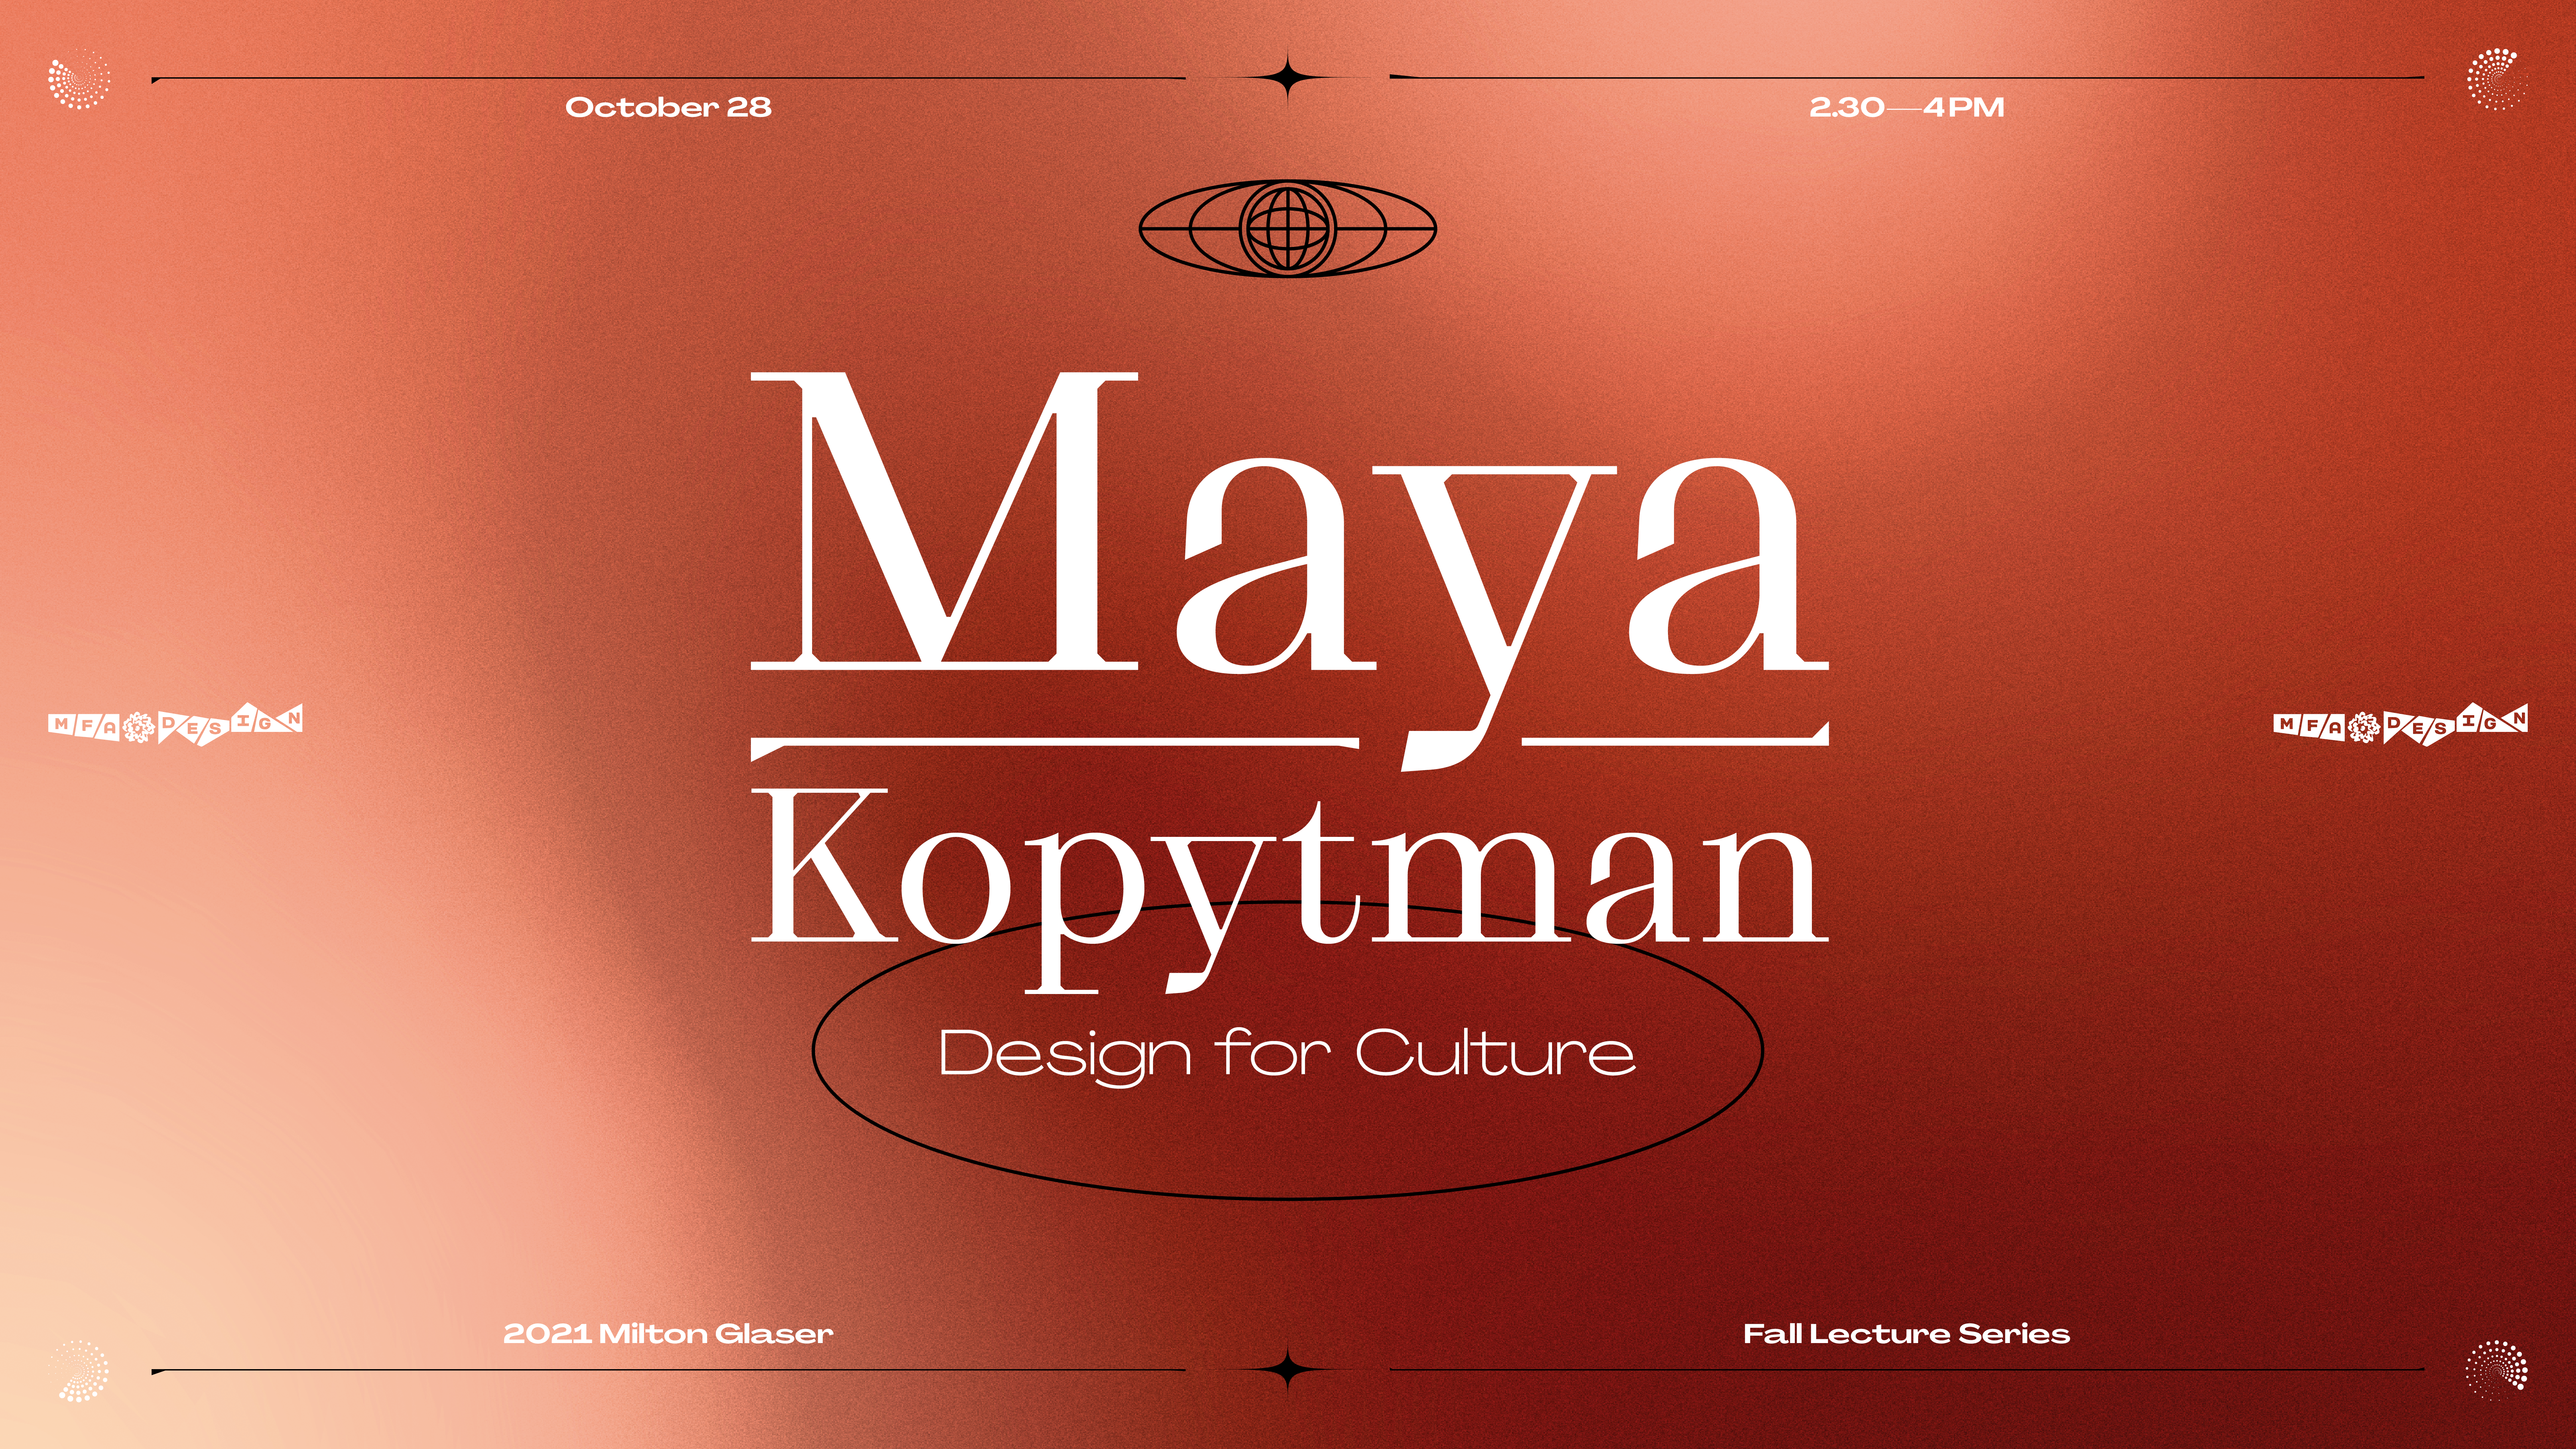 Banner of 2021 Milton Glaser Fall Lecture Series with Maya Kopytman, October 28, 2:30pm. White text on red background